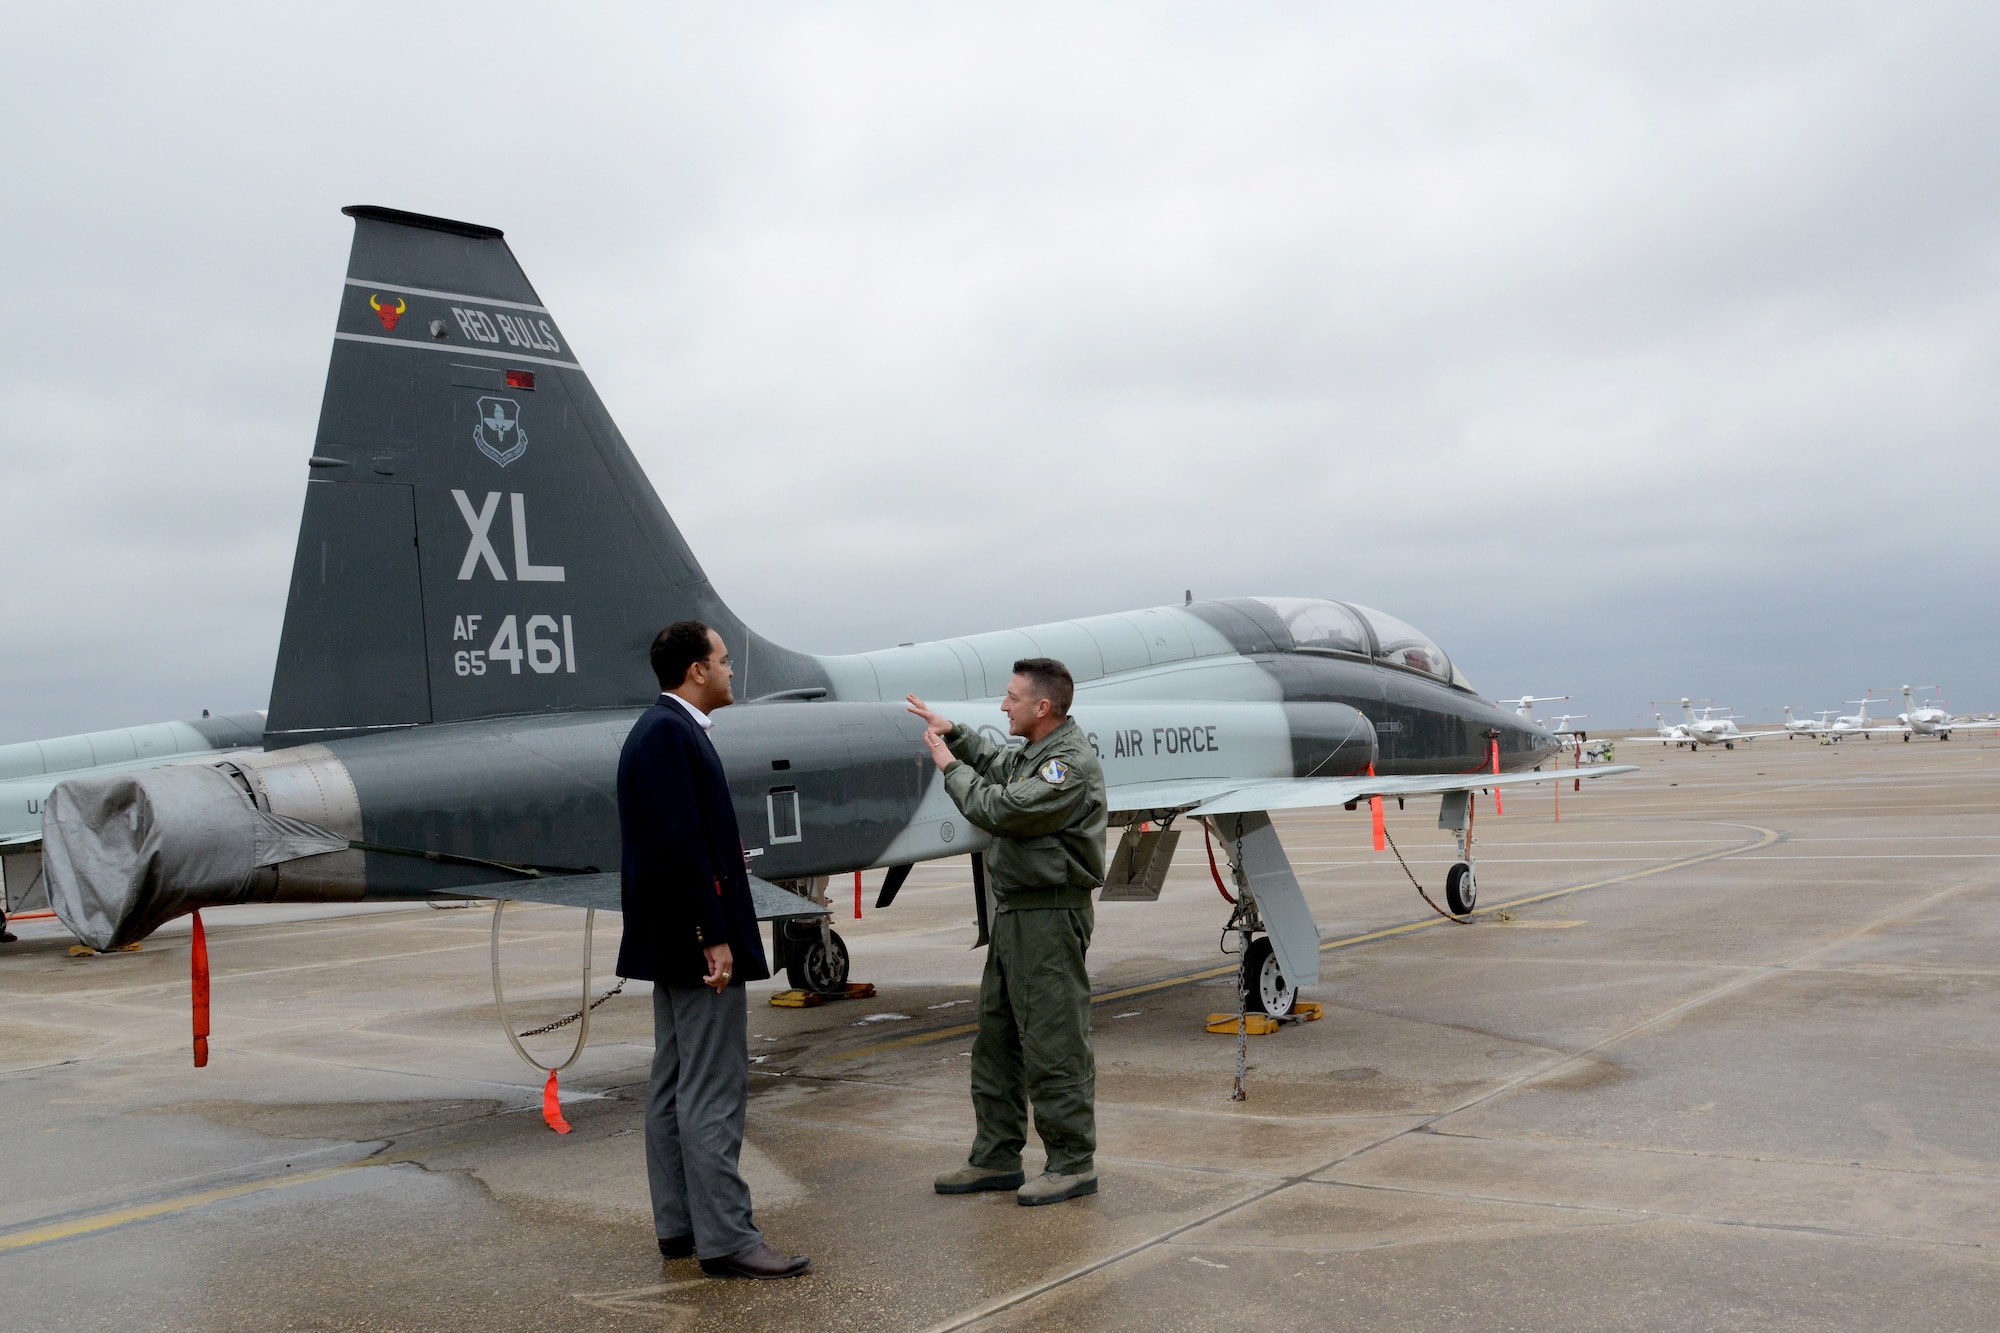 Col. Brian Hastings, 47th Flying Training Wing commander, explains the history of the T-38 Talon jet trainer aircraft to U.S. Rep. Will Hurd, Texas’ 23rd Congressional District congressman, at Laughlin Air Force Base, Texas, Jan. 10, 2015. The T-38 is used in Laughlin’s specialized undergraduate pilot training to prepare students for front-line fighter and bomber aircraft, such as the F-22 Raptor and A-10 Thunderbolt. (U.S. Air Force photo by Airman 1st Class Ariel D. Delgado)(Released)